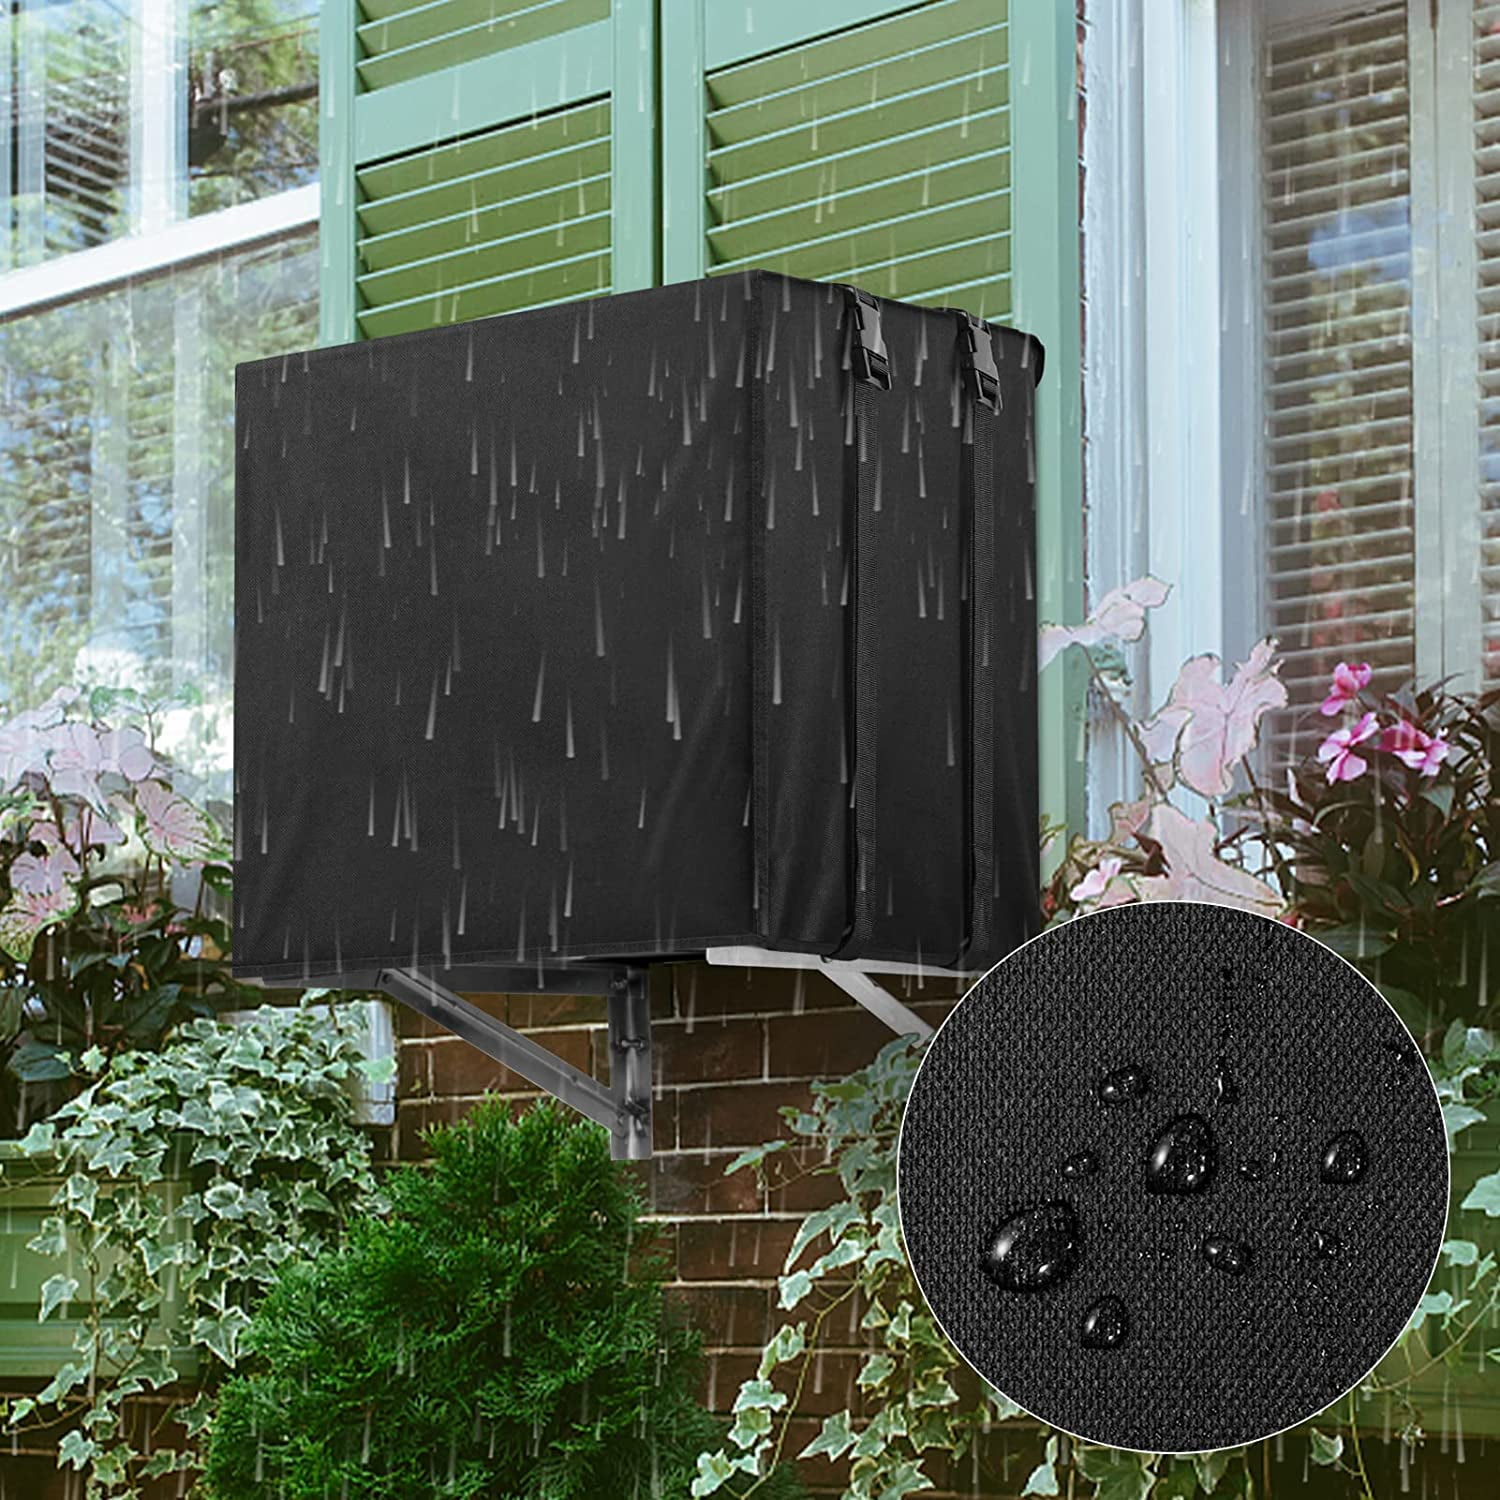 Air Conditioner Covers for Window Units Outdoor Ac Cover Outside Heavy Duty Waterproof  Insulation Defender with Adjustable Strap - 25.19 x 20.86 x 17.32 -  Black 